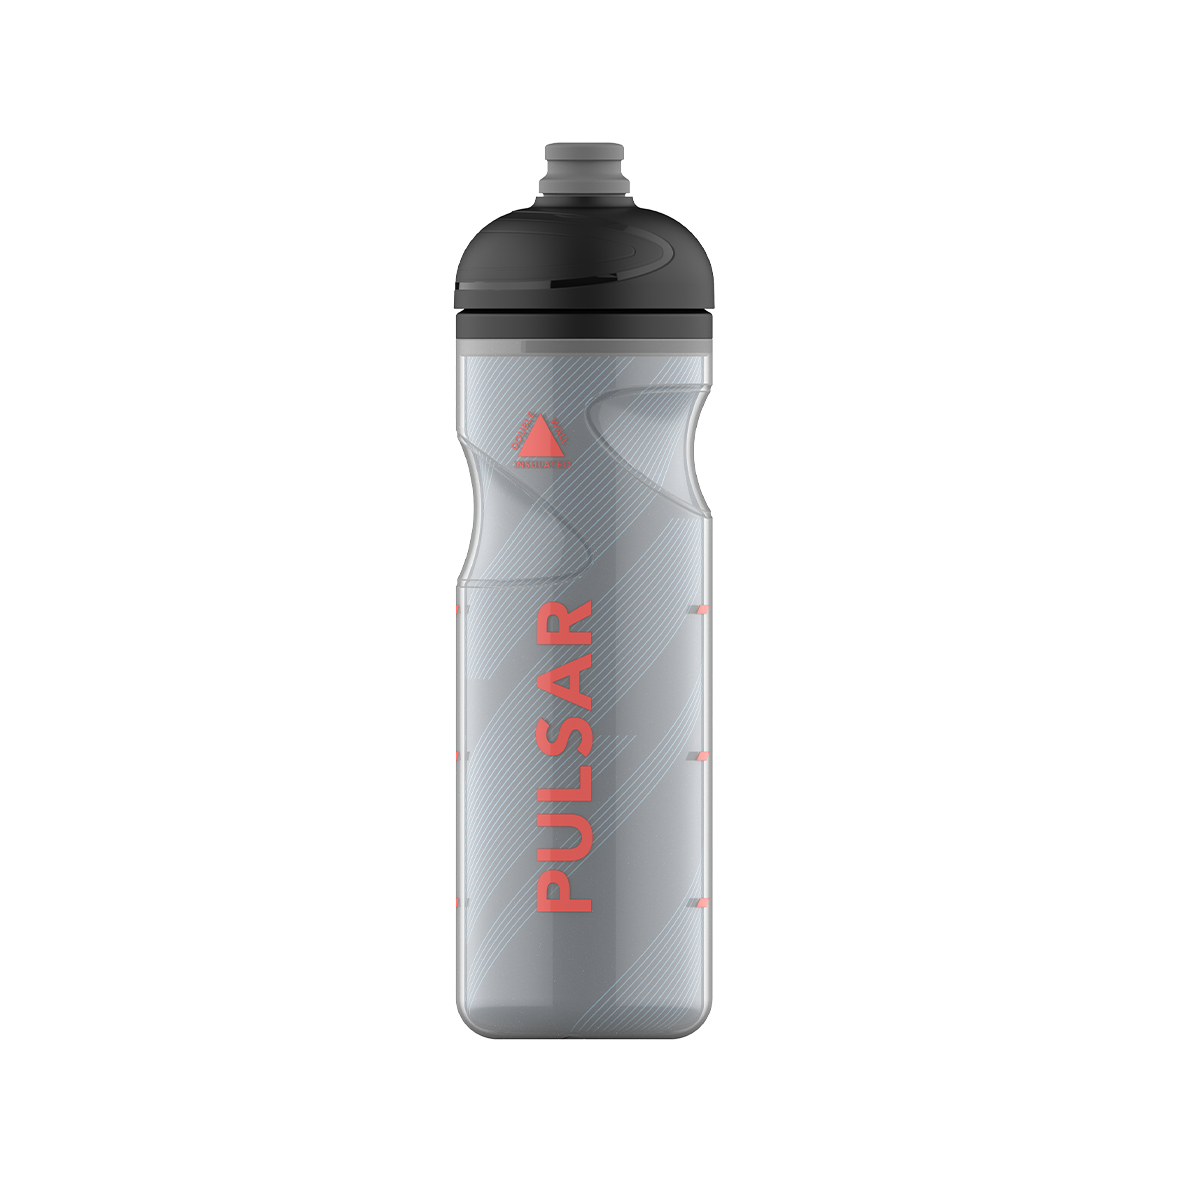 Bottle Pulsar Therm Night 0.65 L Sigg, Thermos